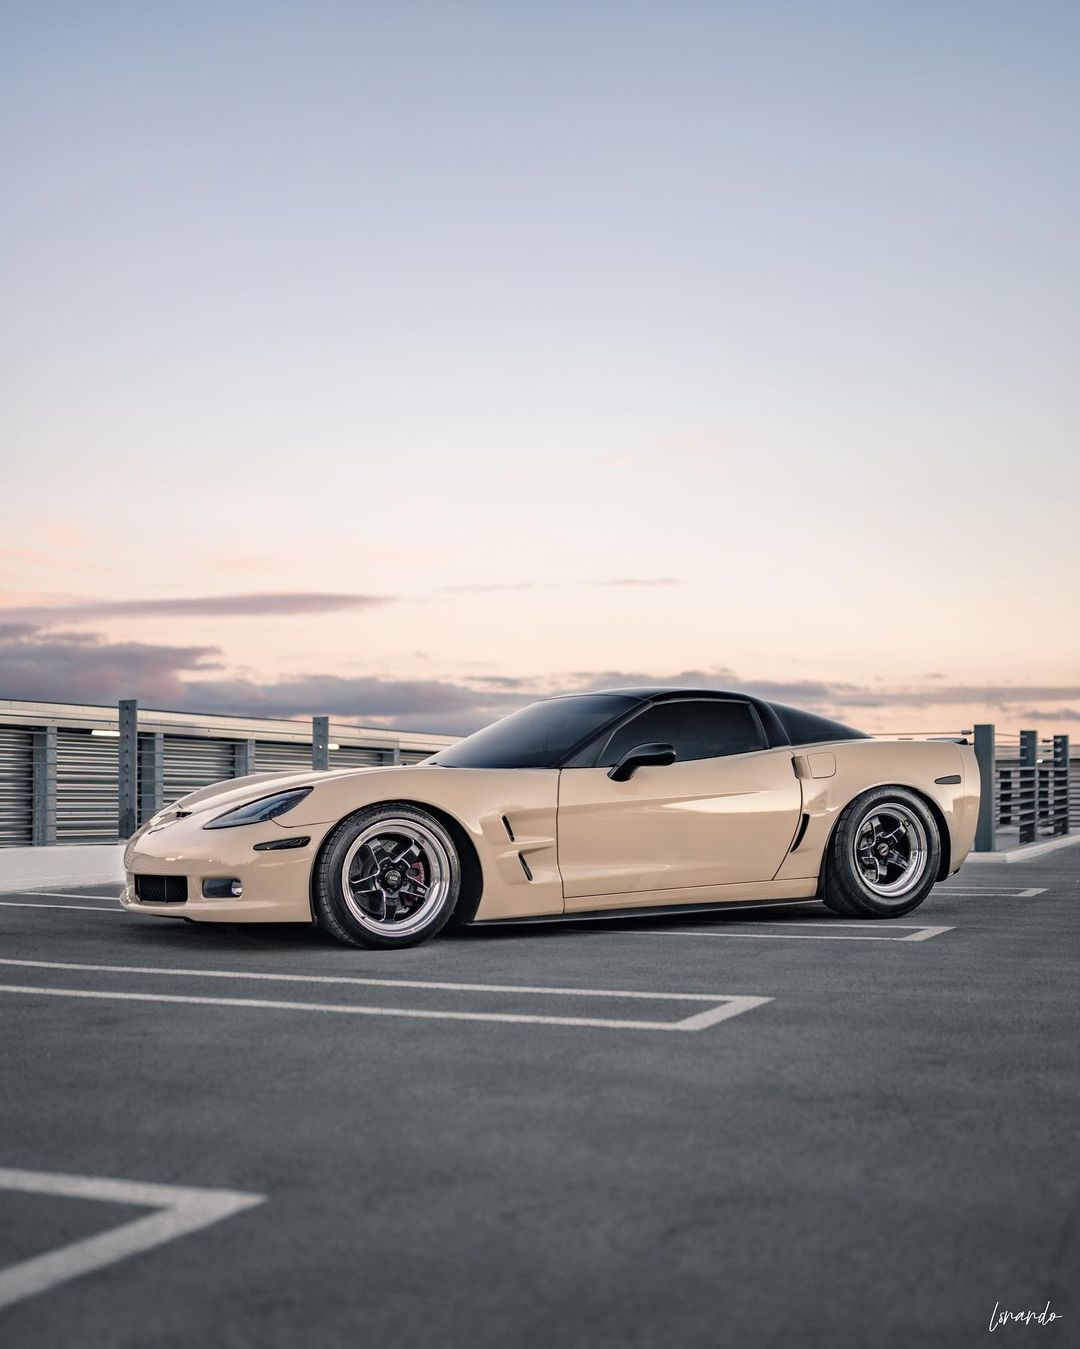 Lowered Chevy Corvette C6 with custom suspension